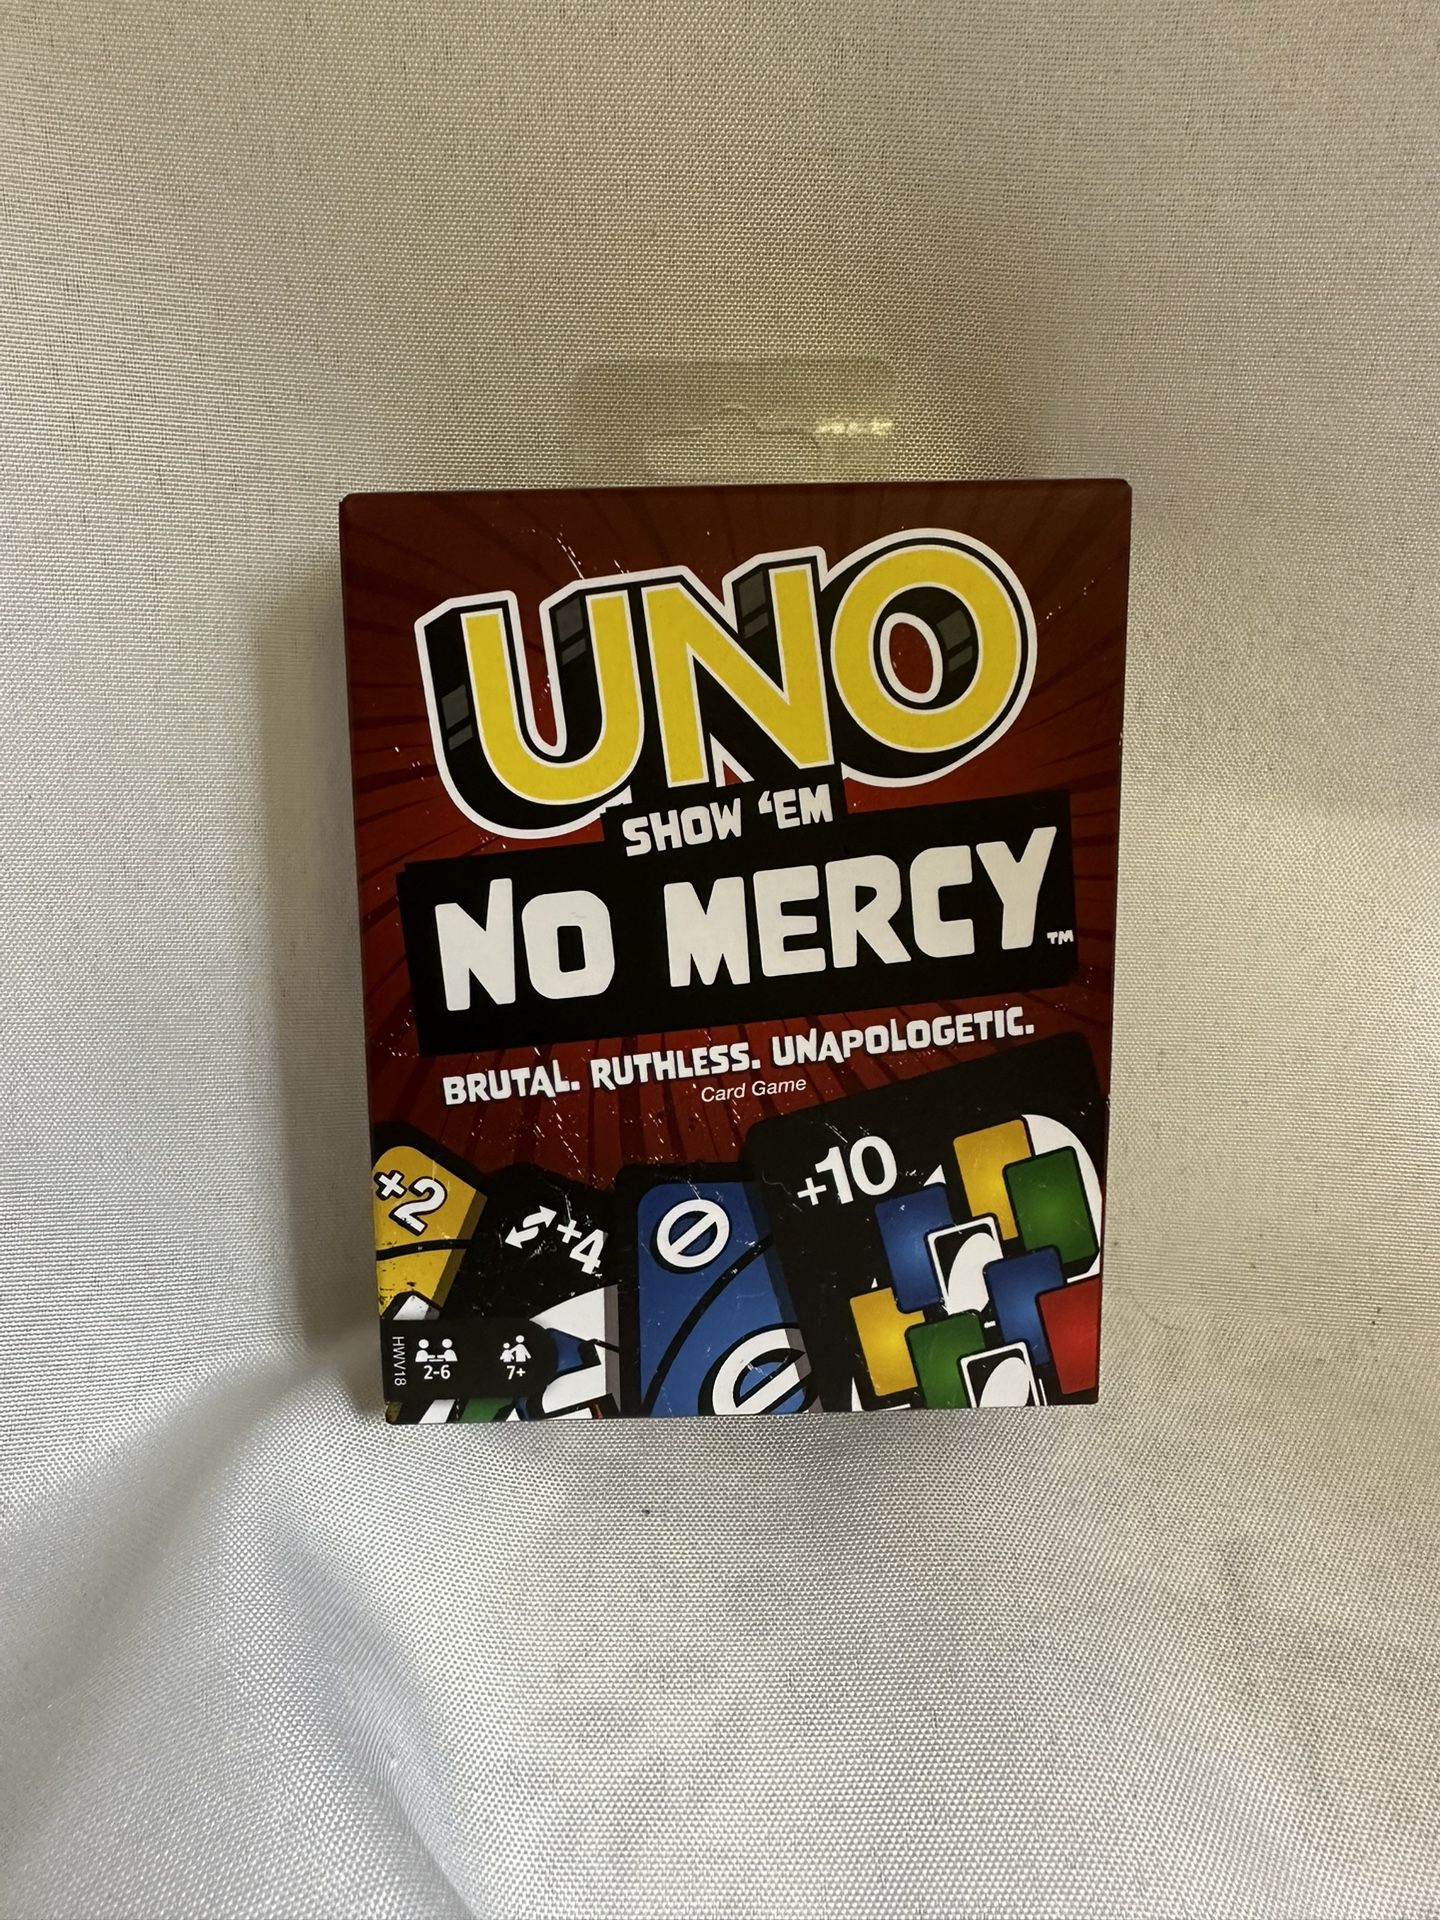 UNO Show Em No Mercy Card Game Sealed! New! SOLD OUT EVERYWHERE! Limited  Edition for Sale in Spokane, WA - OfferUp